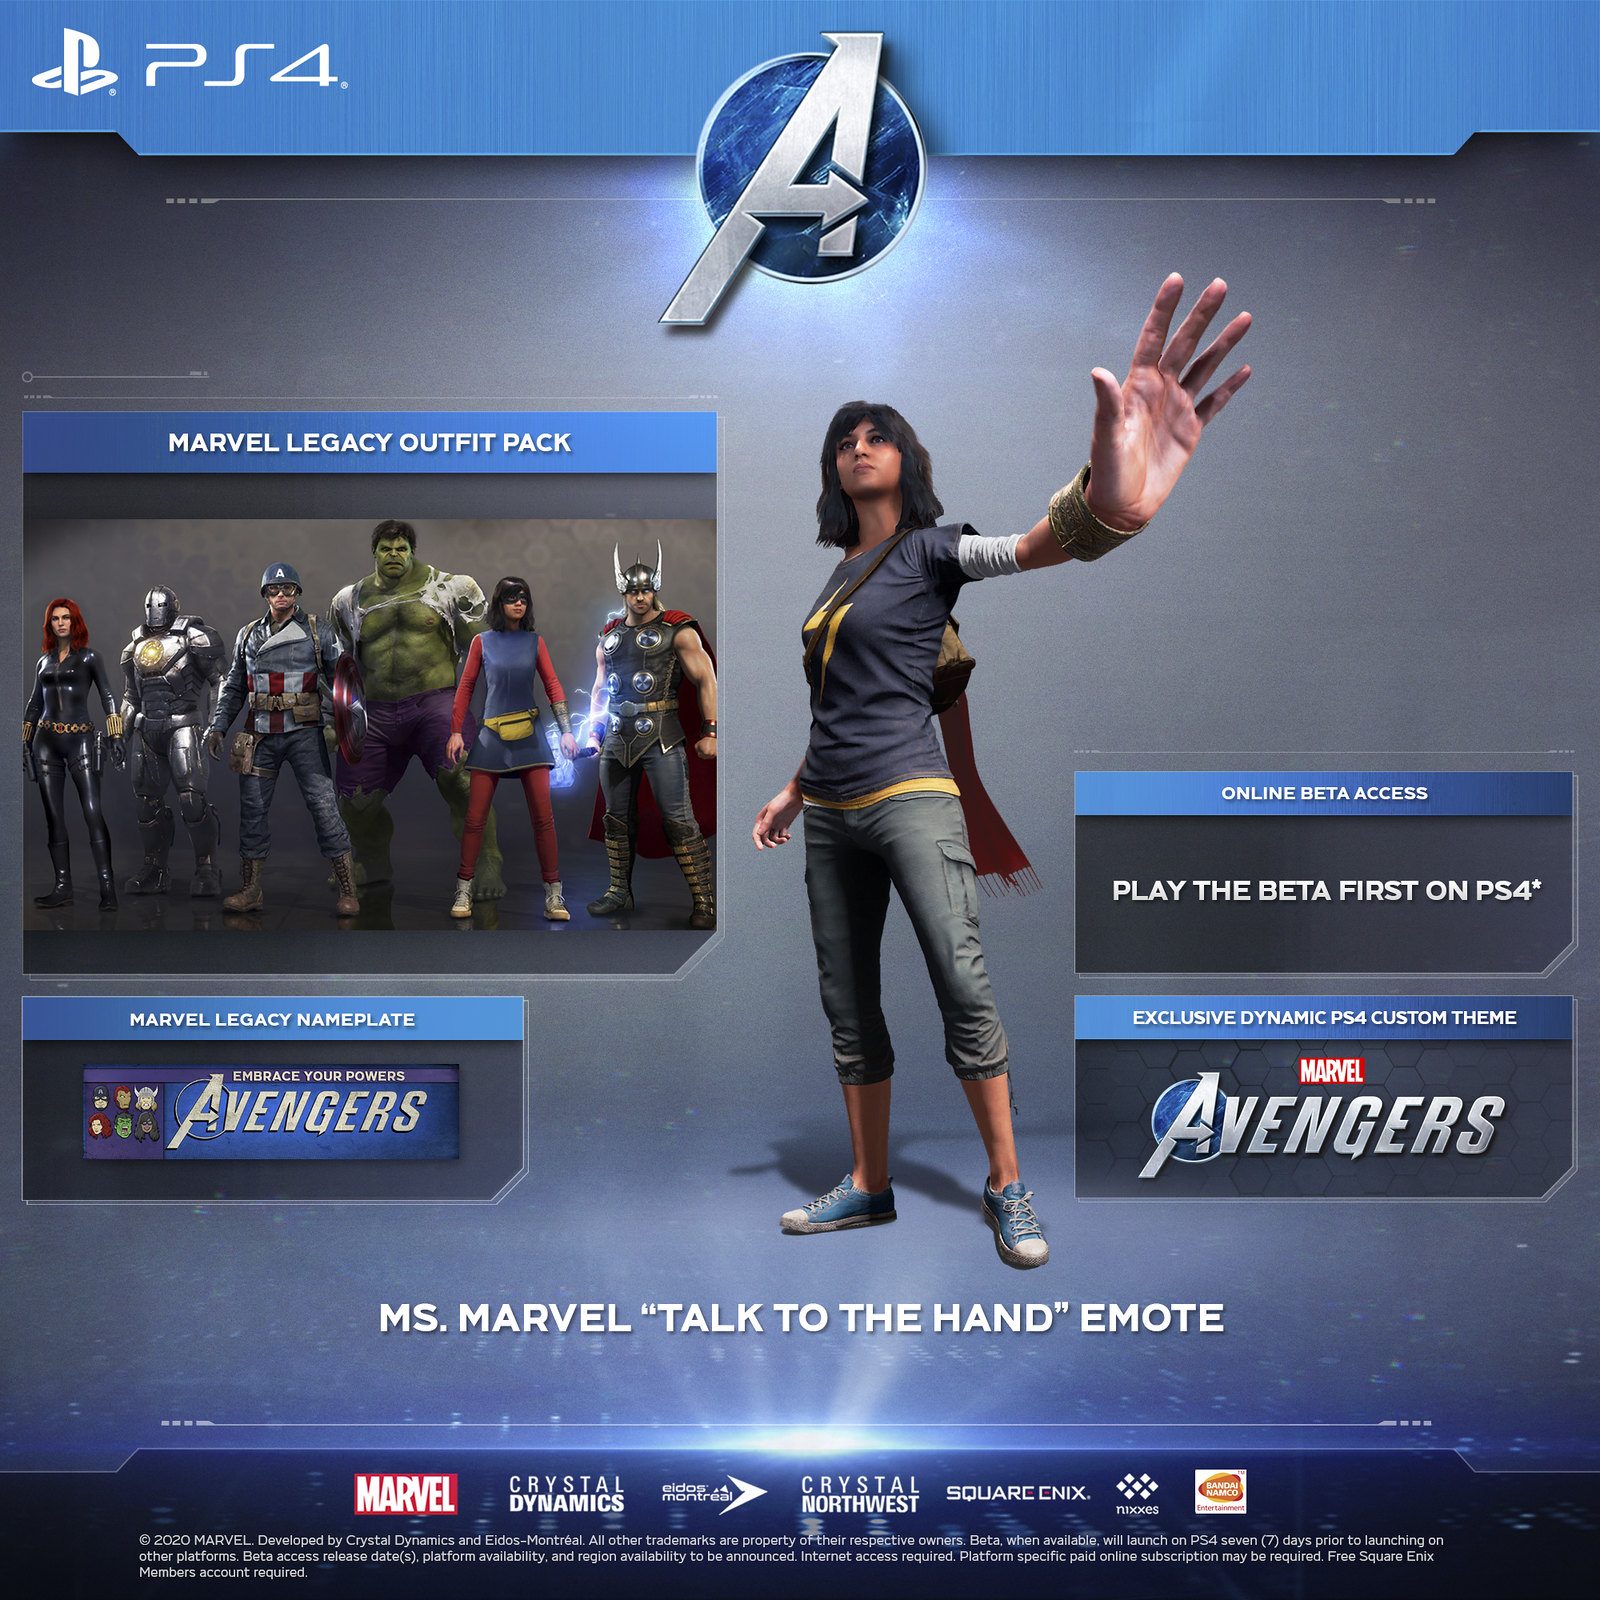 Styrke Bugsering Evne Marvel's Avengers - Special Editions [COMPARED]